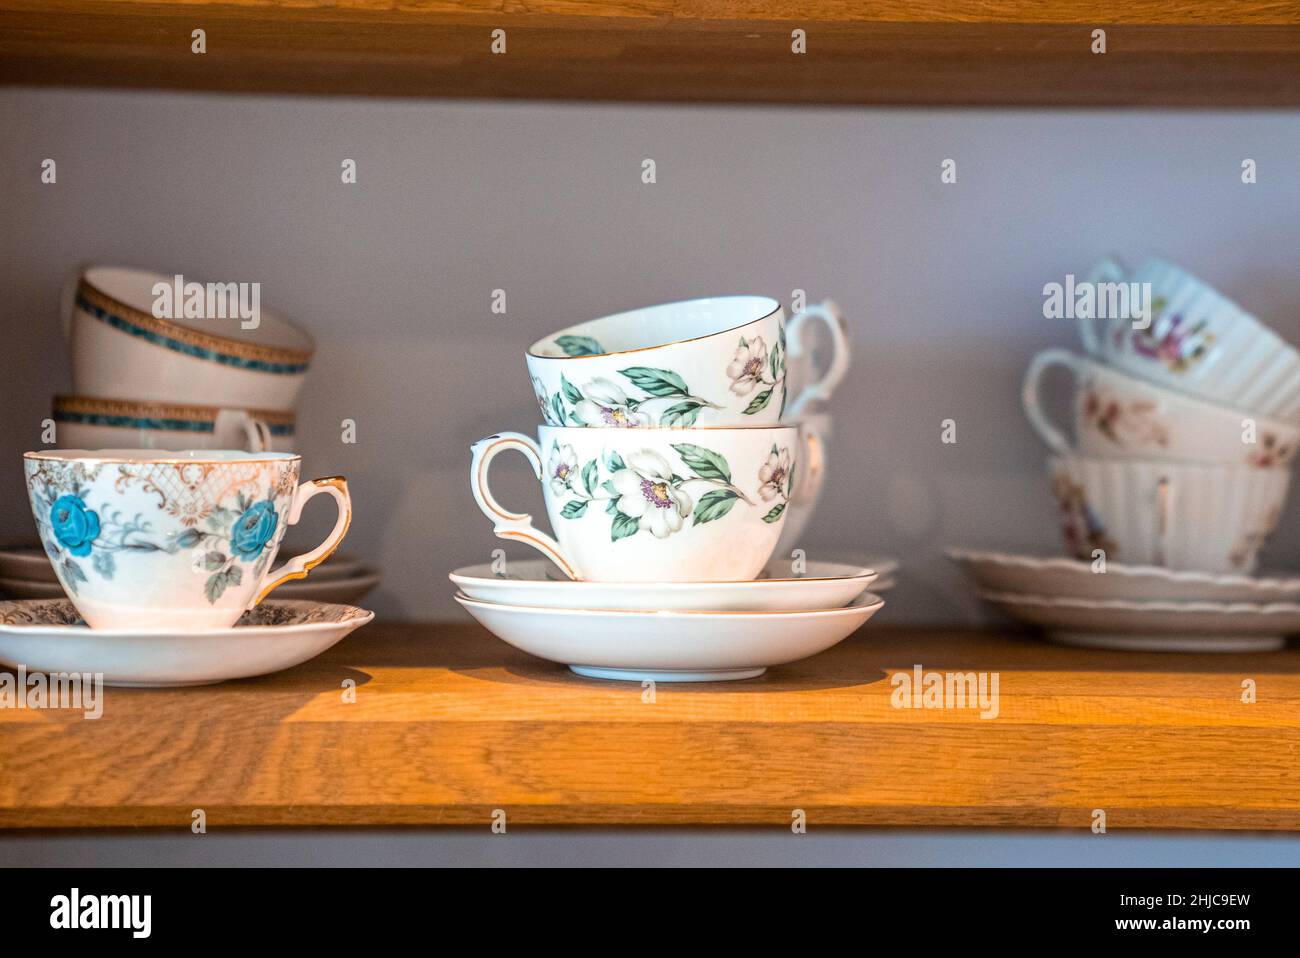 Hand painted ceramic floral pattern teacups with saucers on shelves Stock Photo